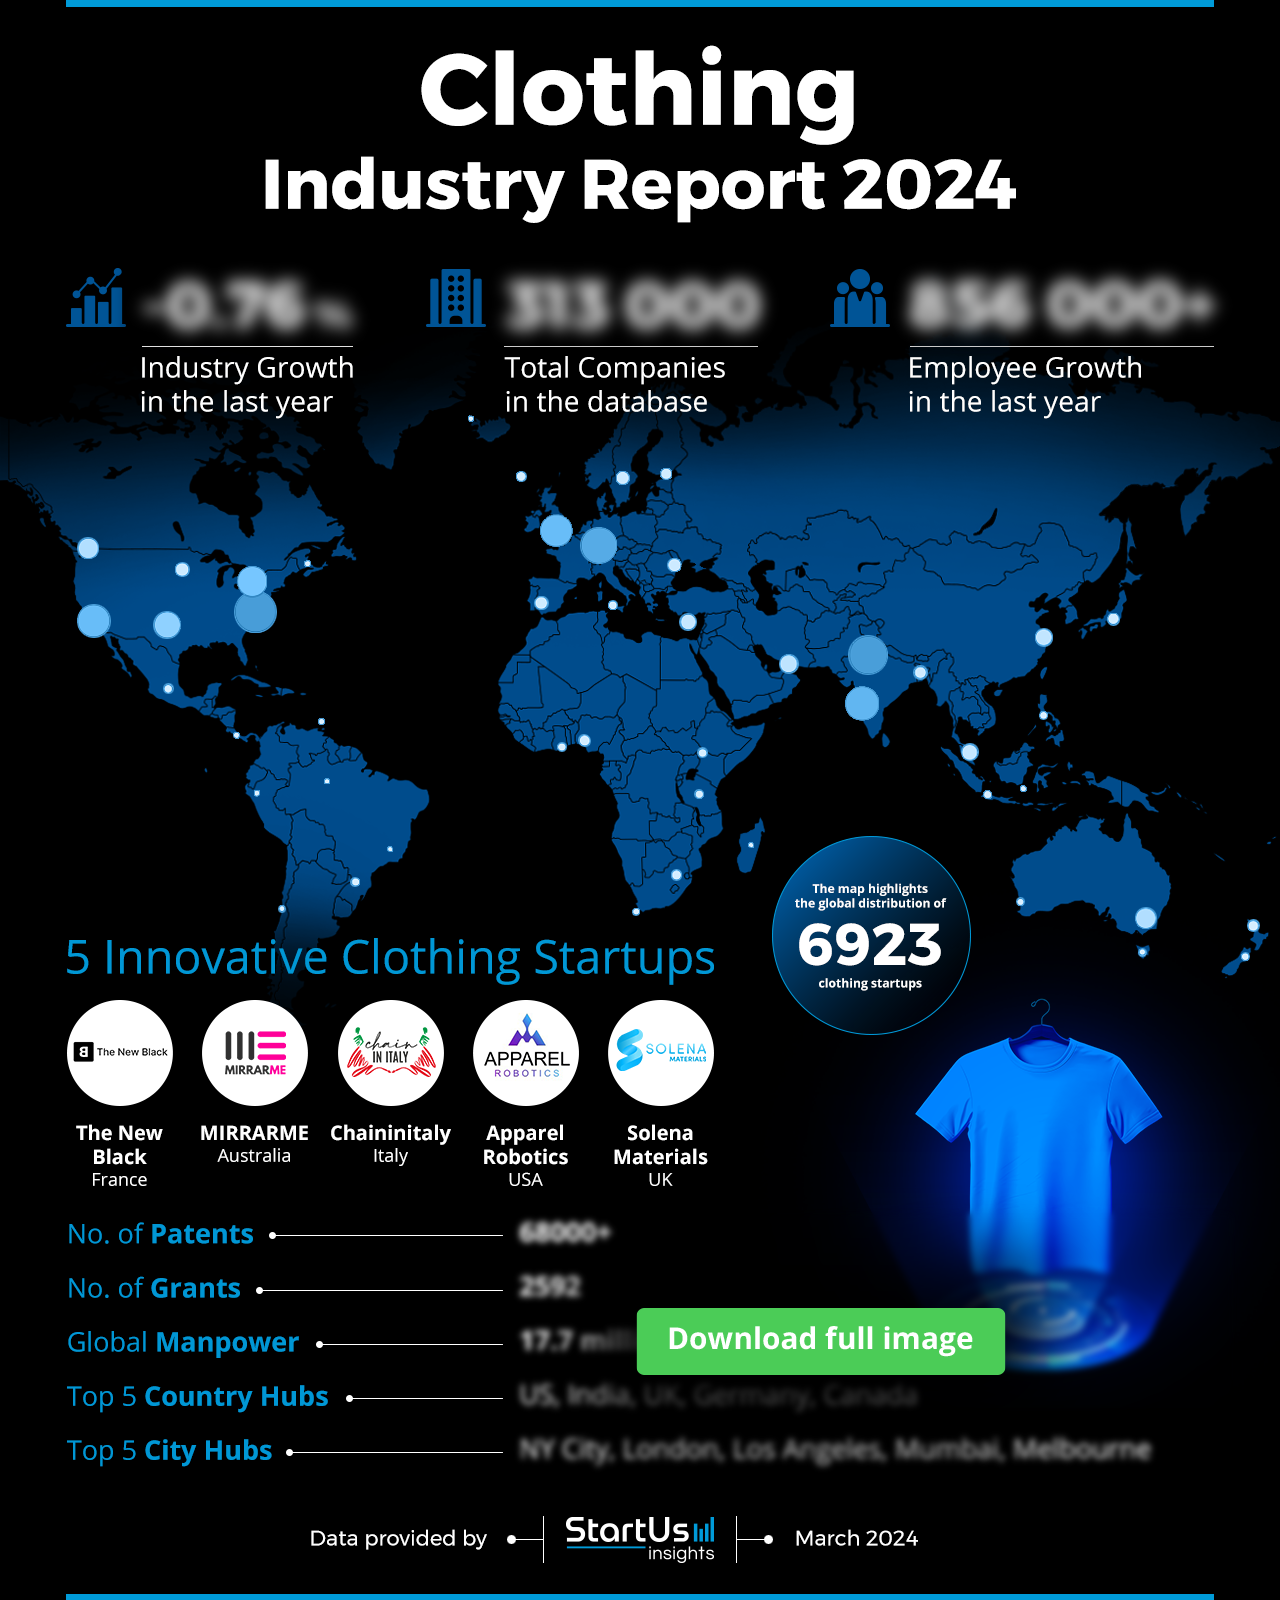 Clothing-Industry-Outlook-Report-HeatMap-Blurred-StartUs-Insights-noresize